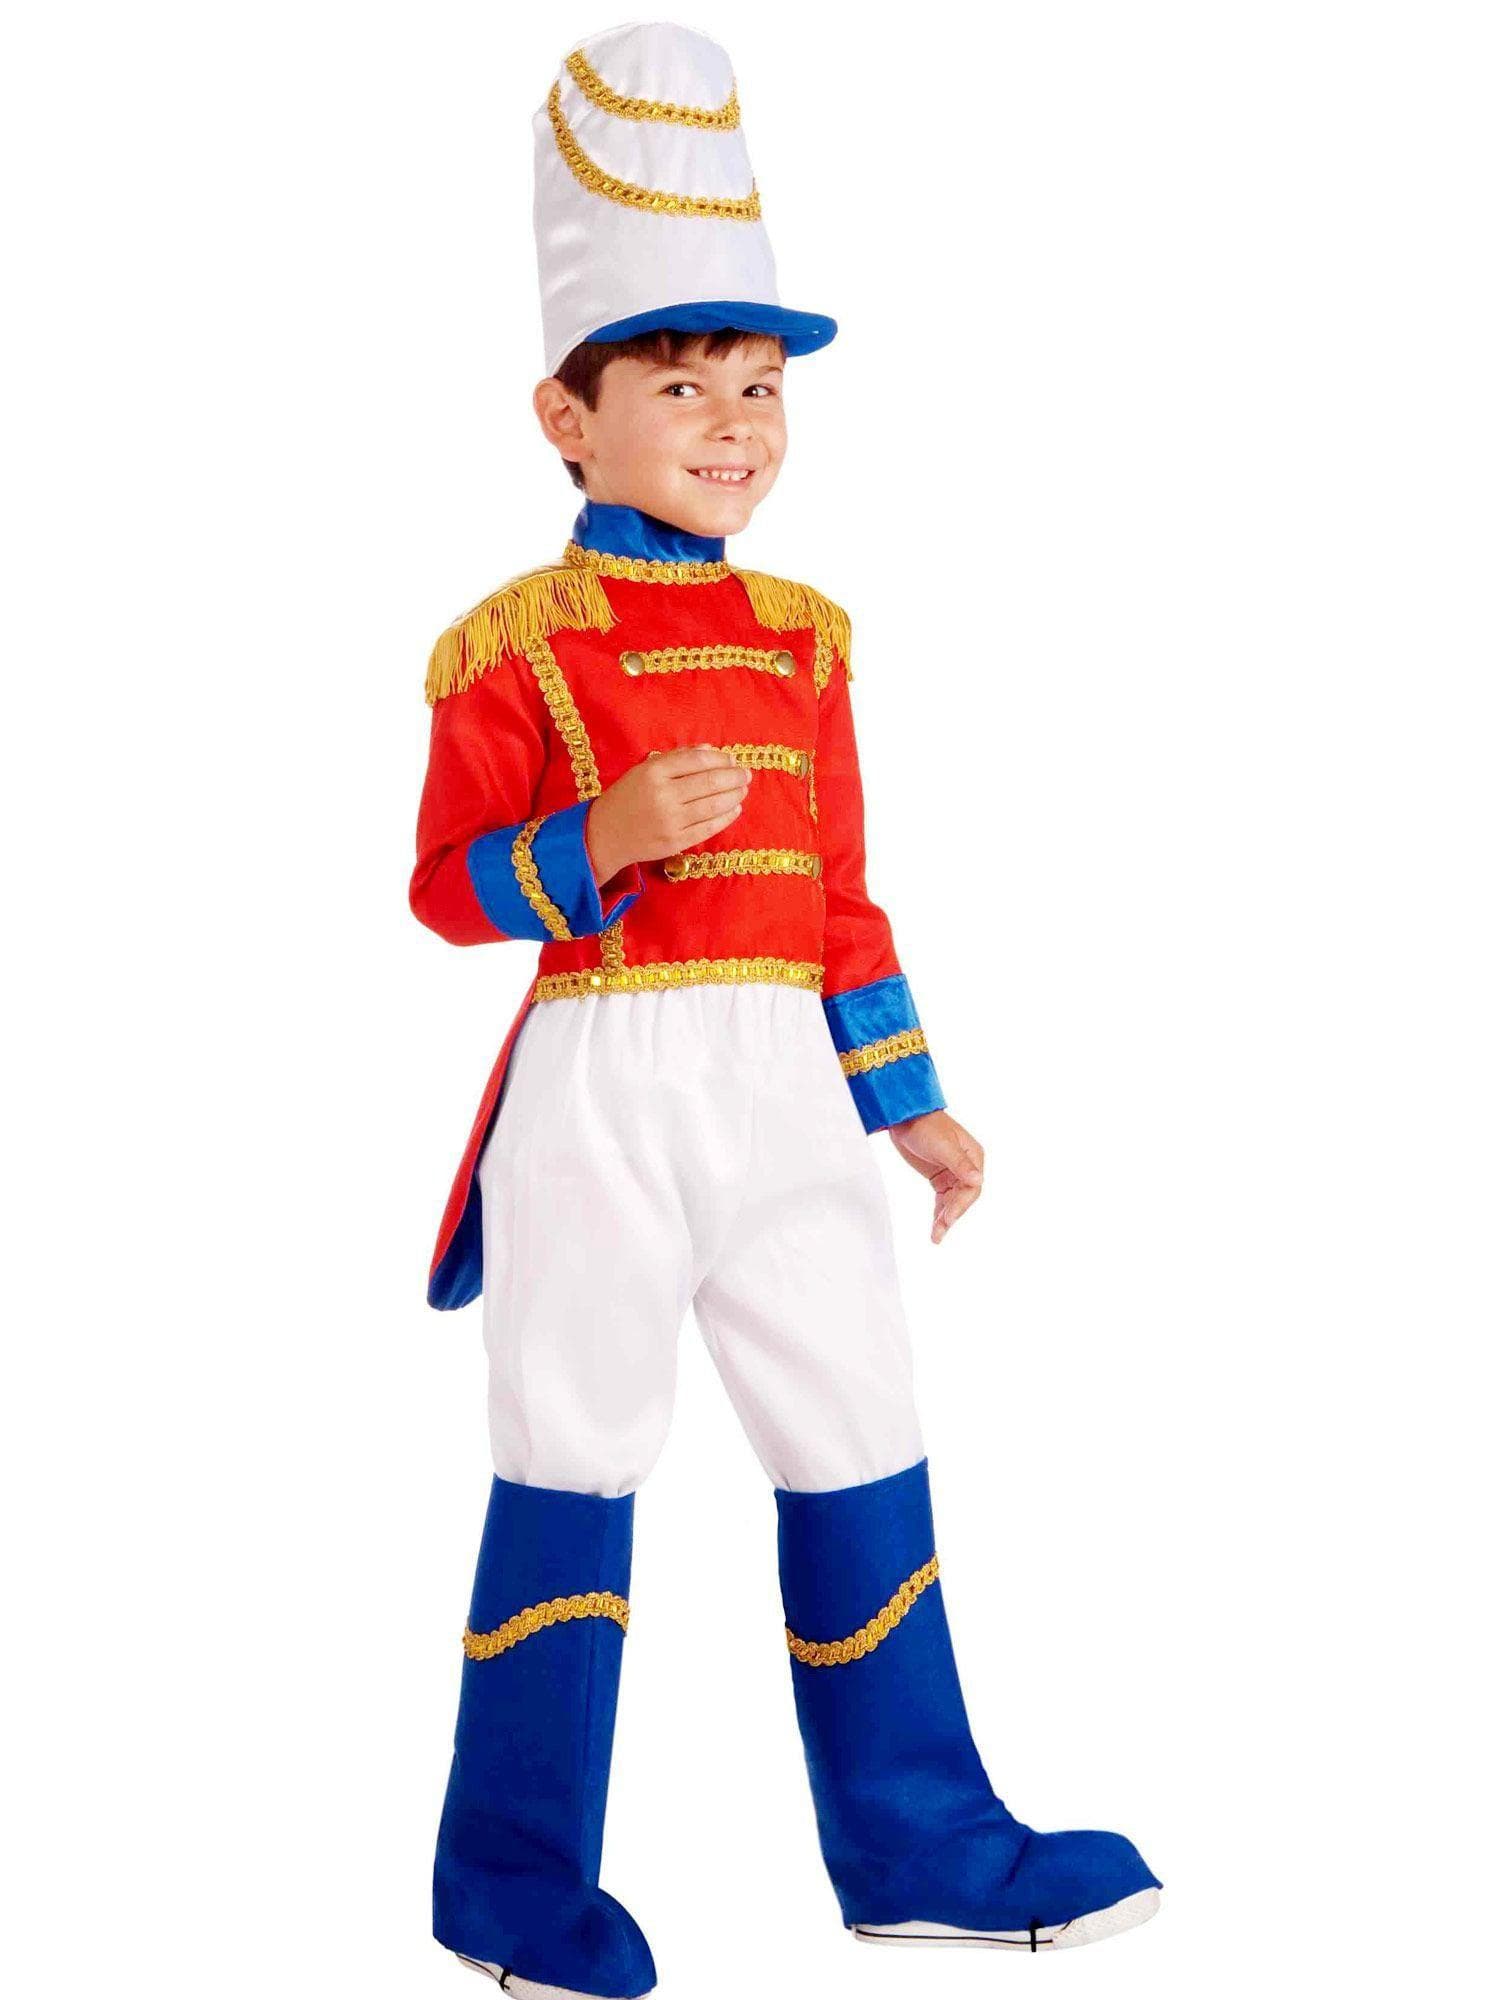 Kid's Toy Soldier Costume - costumes.com